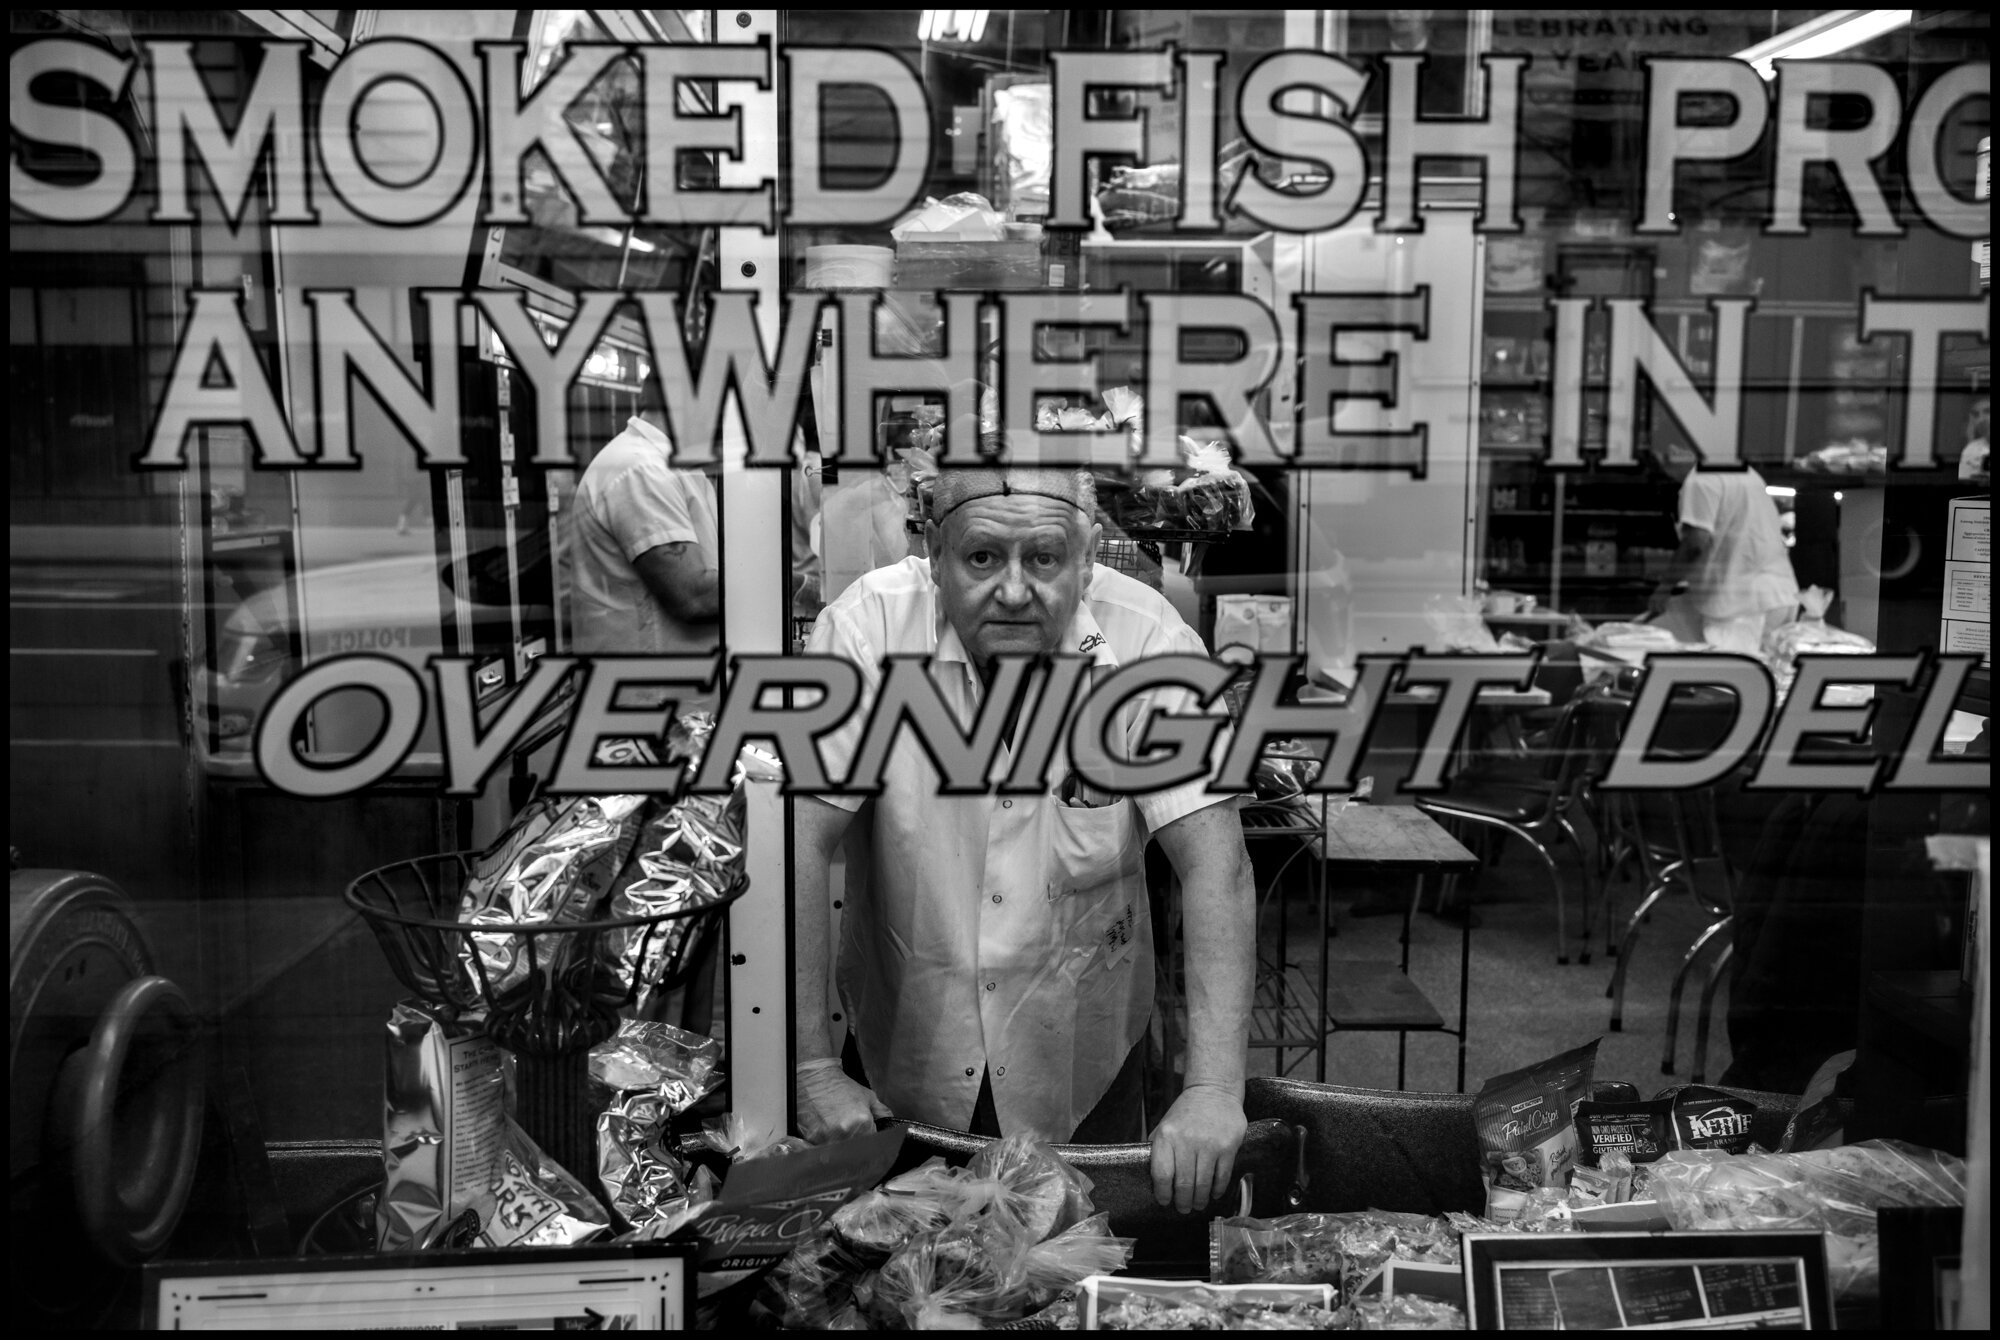  Joe who works at Barney Green Grass—The Sturgeon King, open for deliveries. Amsterdam Ave.  March 24, 2020. © Peter Turnley.  ID# 03-005 